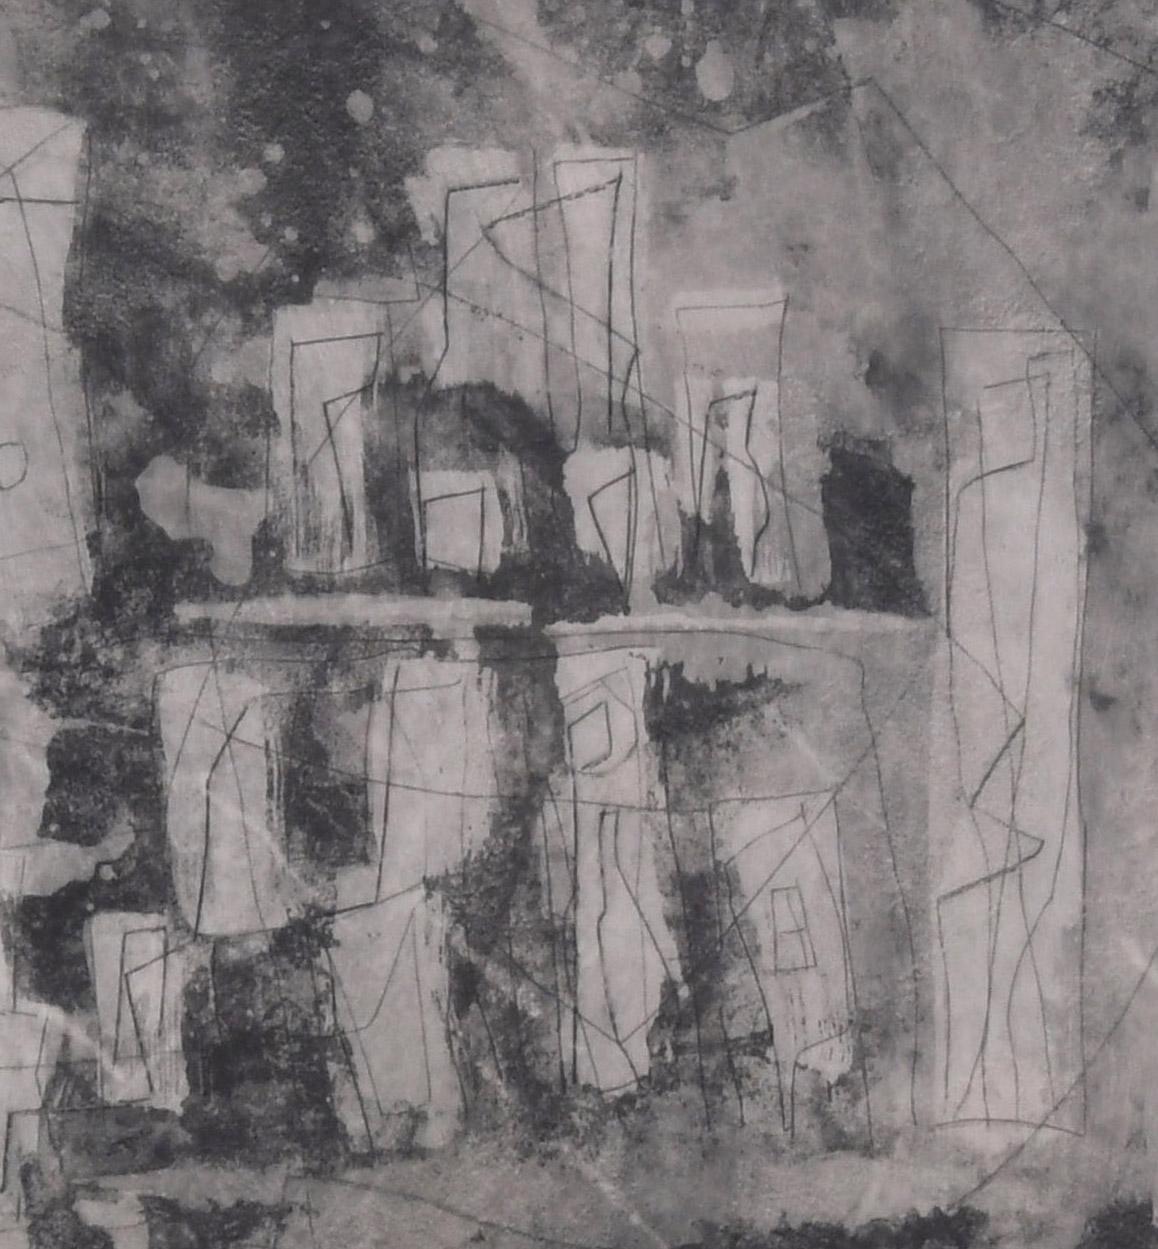 Ancient Landscape II (Ancient City) - Abstract Expressionist Print by Louise Nevelson